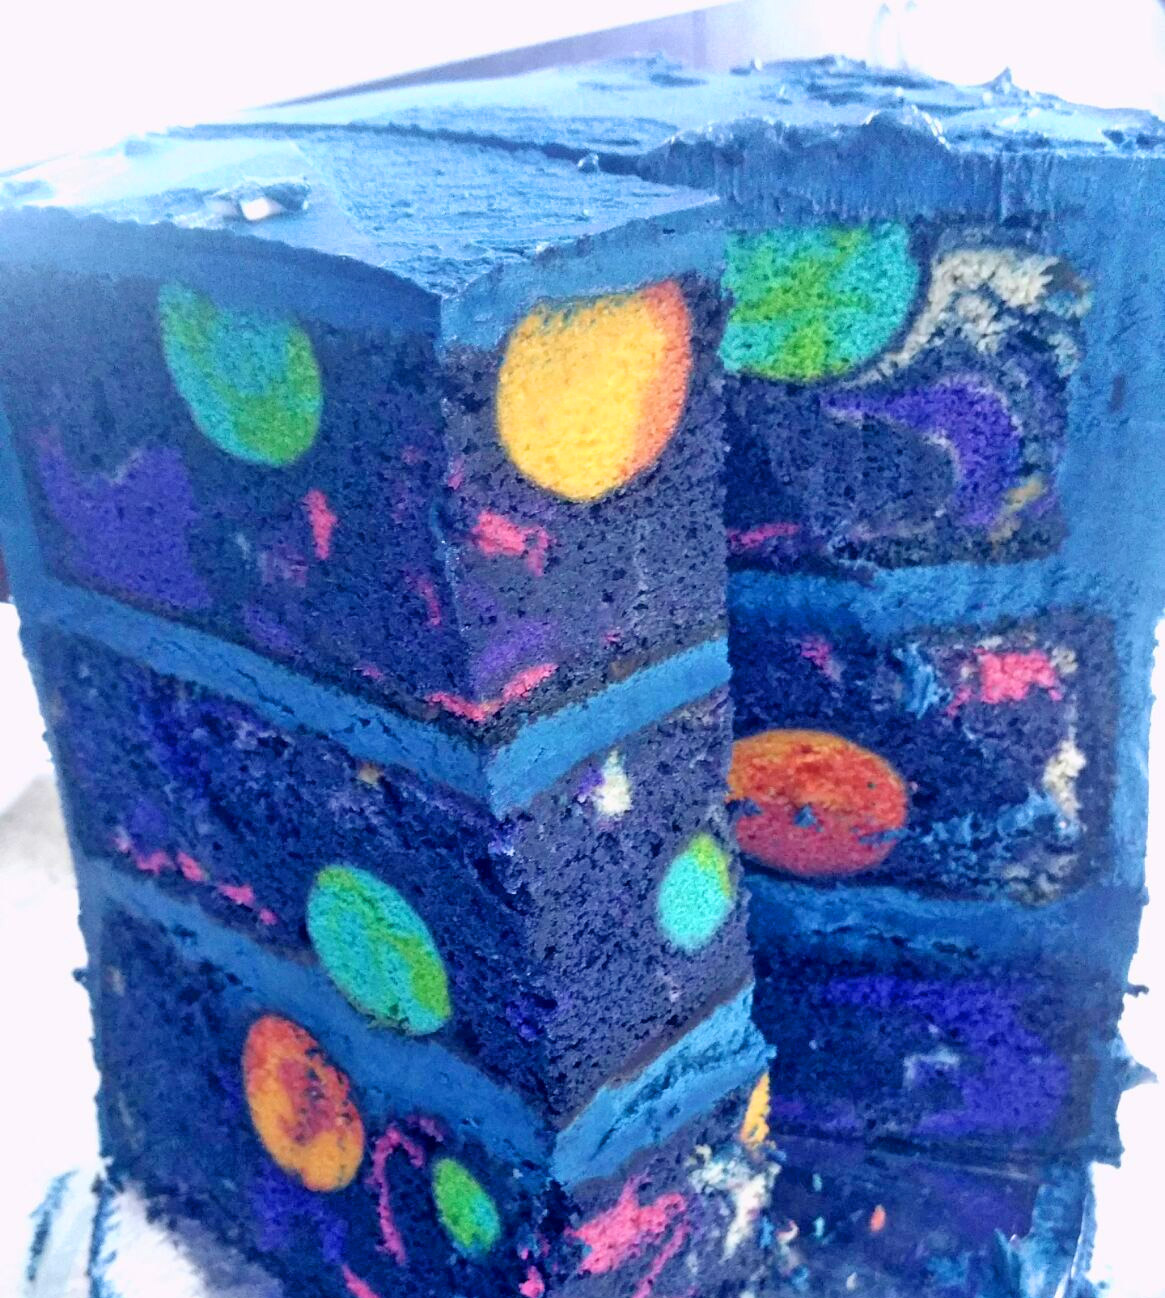 Space-Themed Cake Reveals an Entire Galaxy Once Sliced Into